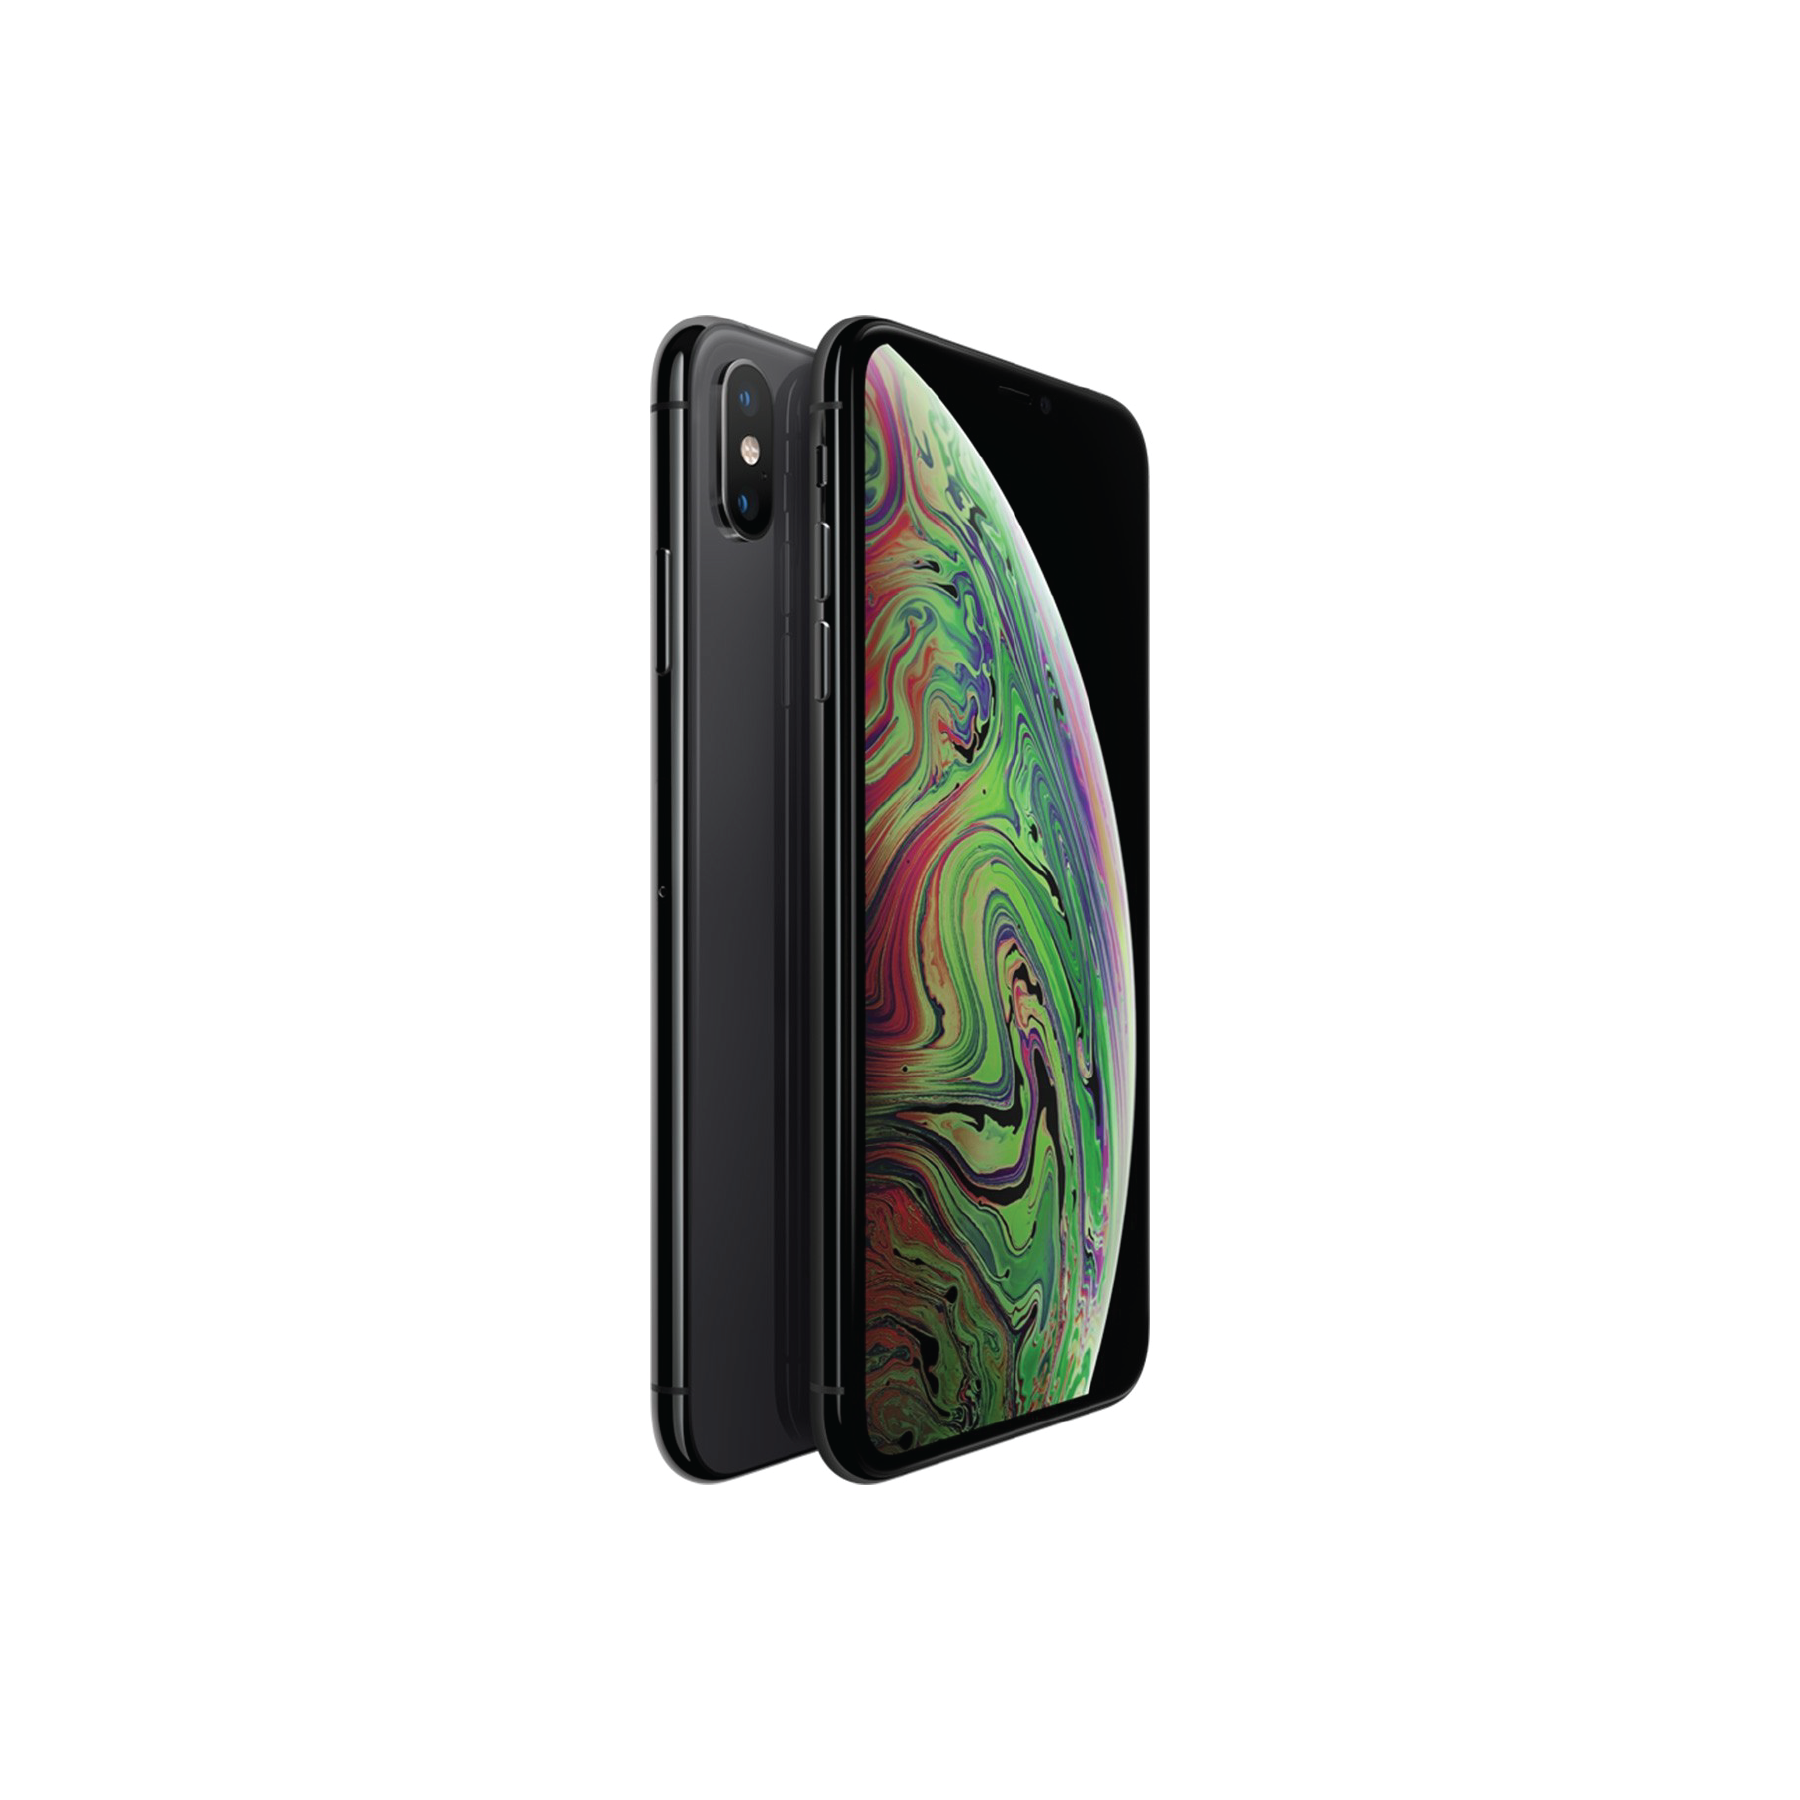 iPhone XS Max 256GB - Space Grey (Better) - iStore Pre-owned